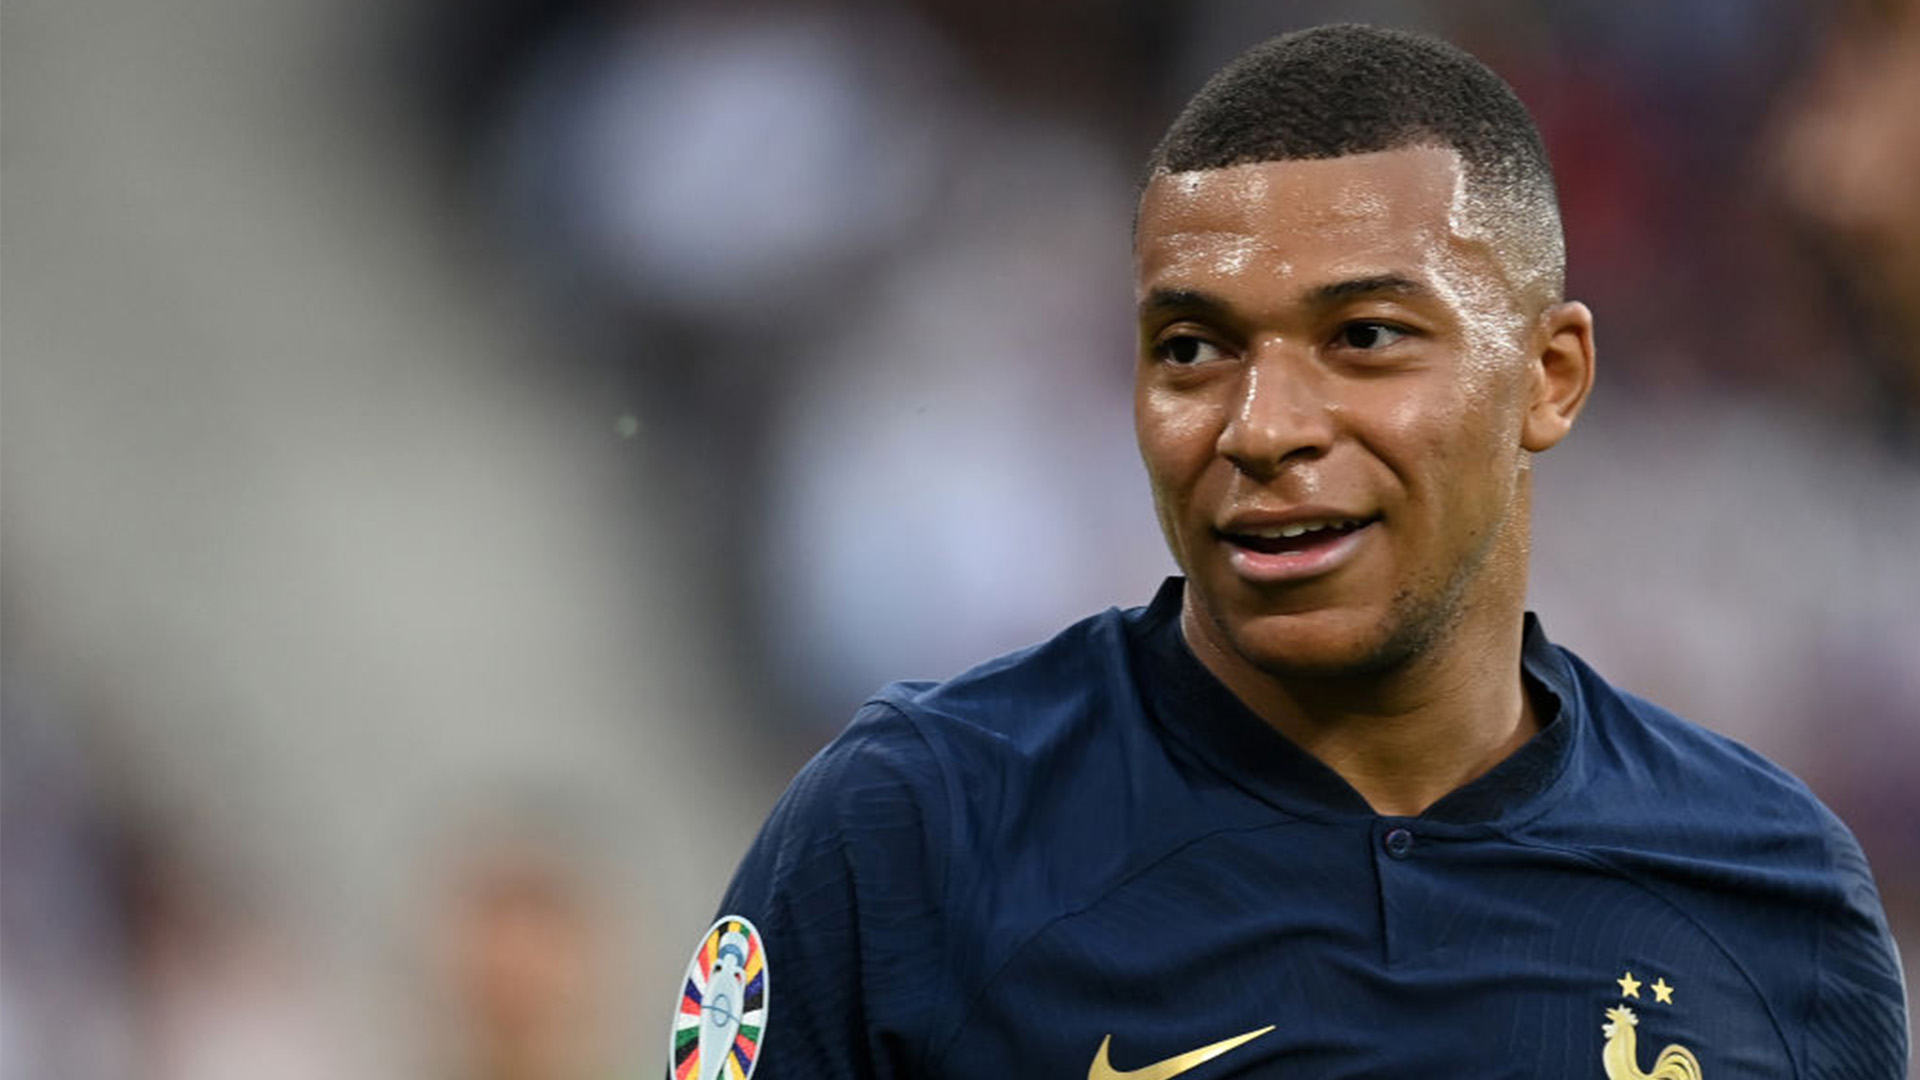 Kylian Mbappé Reportedly Rejects $773M Al-Hilal Offer, But Did He Ever Consider It?